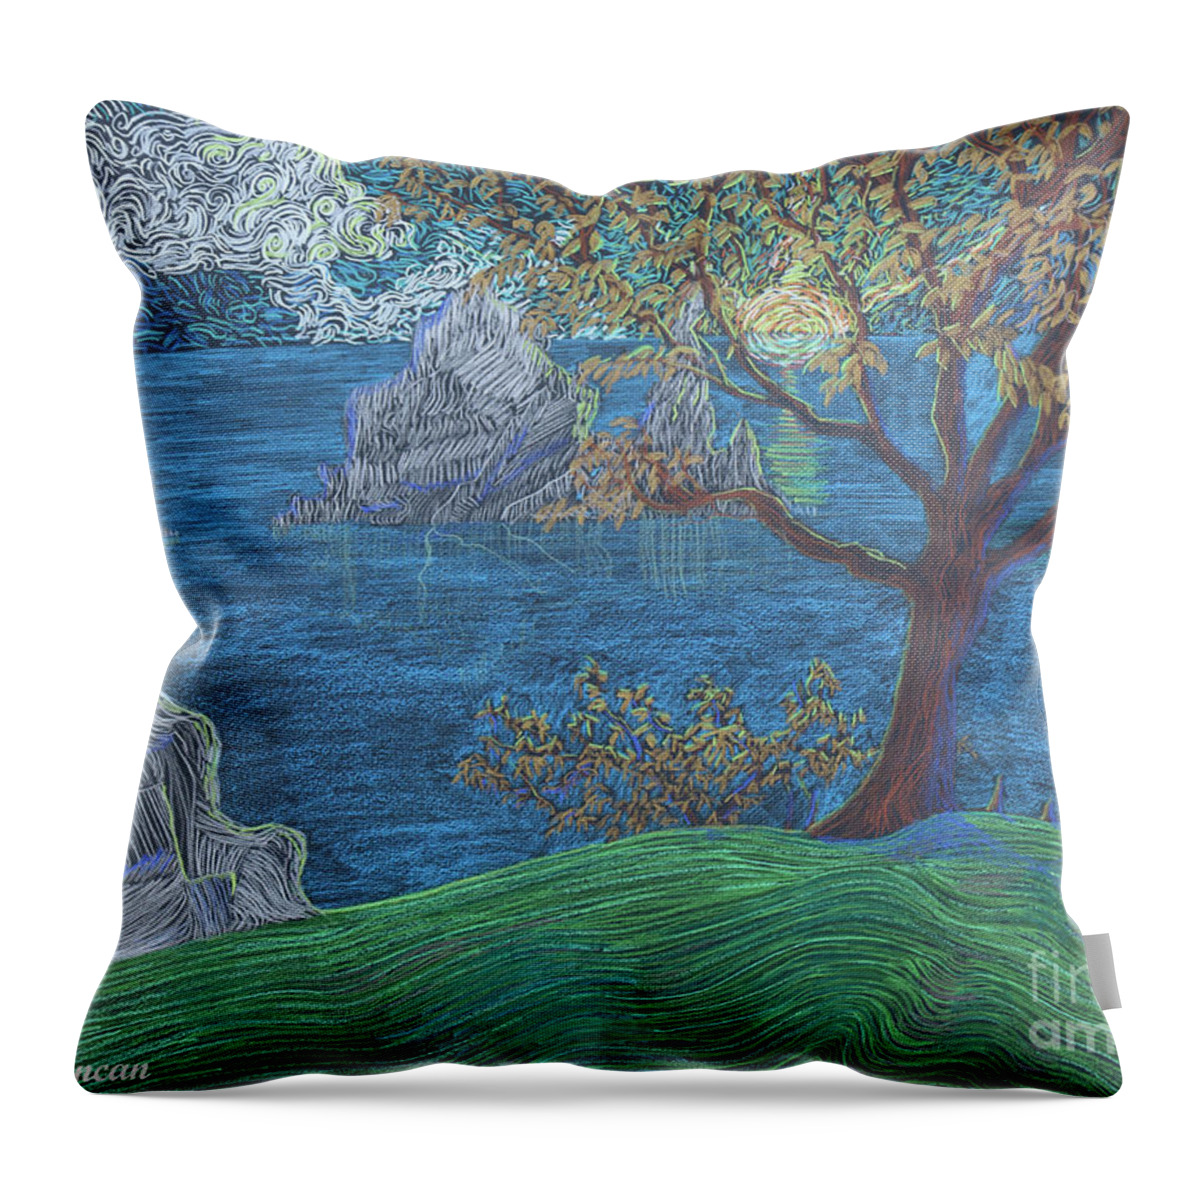 Squigglism Throw Pillow featuring the painting A Rocky Shore by Stefan Duncan